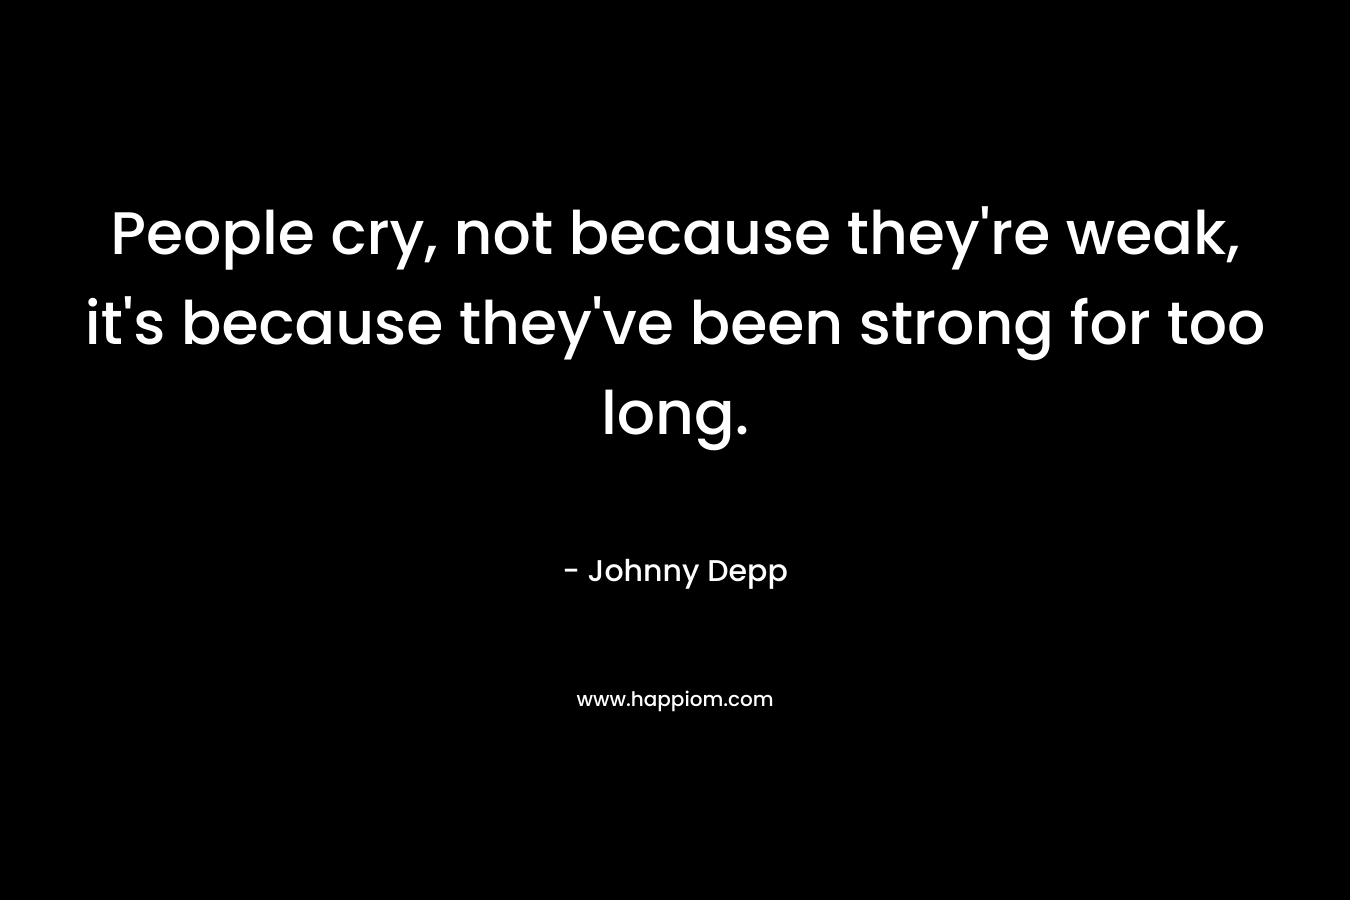 People cry, not because they're weak, it's because they've been strong for too long.